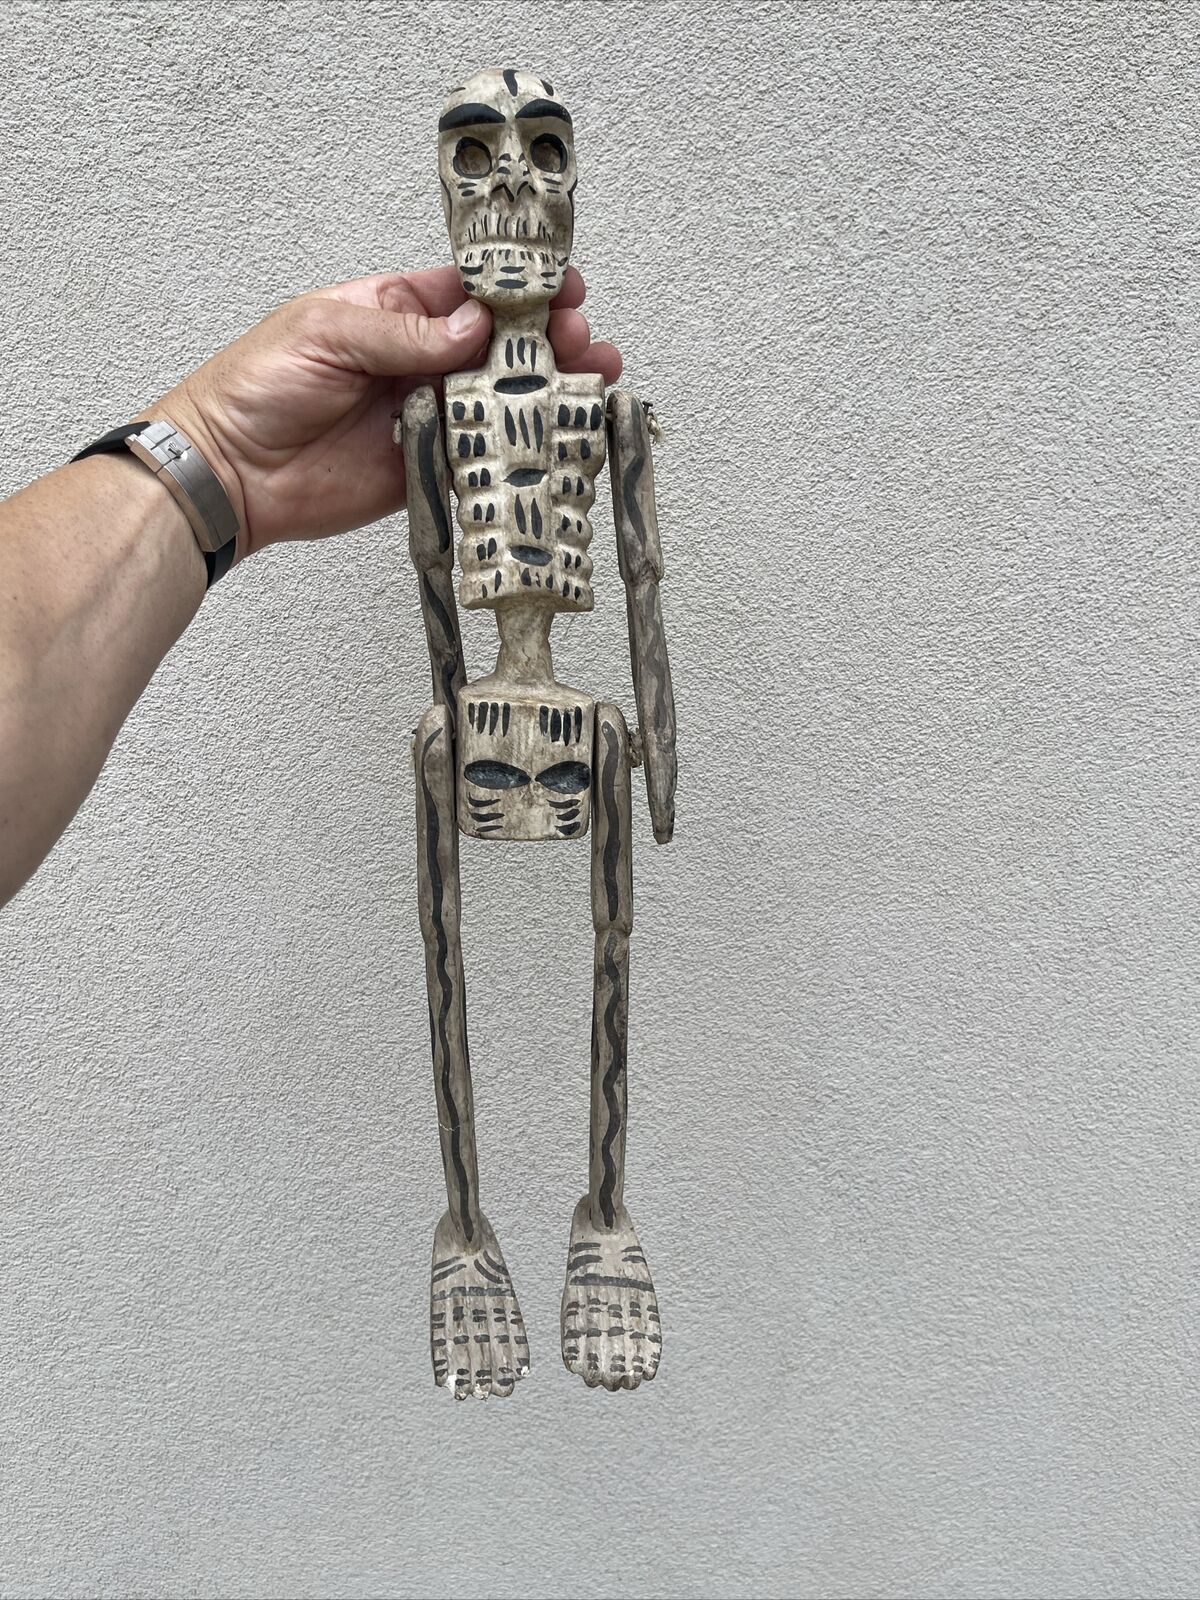 Vintage Hand Carved Wooden Day Of The Dead Skeleton Figure 20 Inches Long